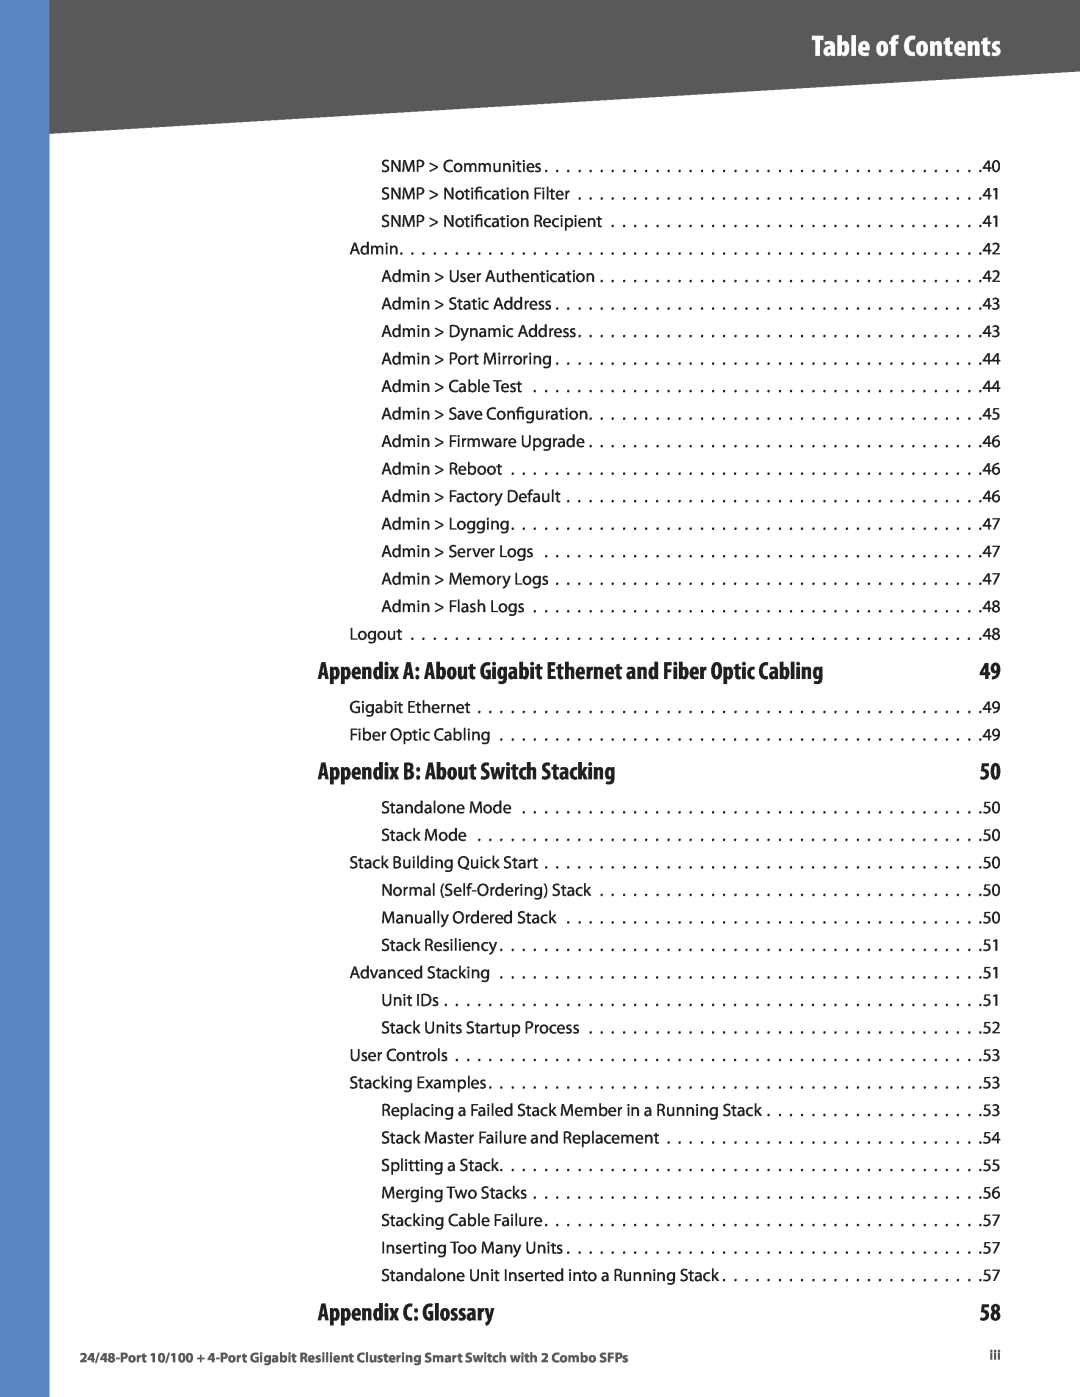 Linksys SLM224G4S (G5), SLM248G4S (G5) manual Appendix B About Switch Stacking, Appendix C Glossary, Table of Contents 